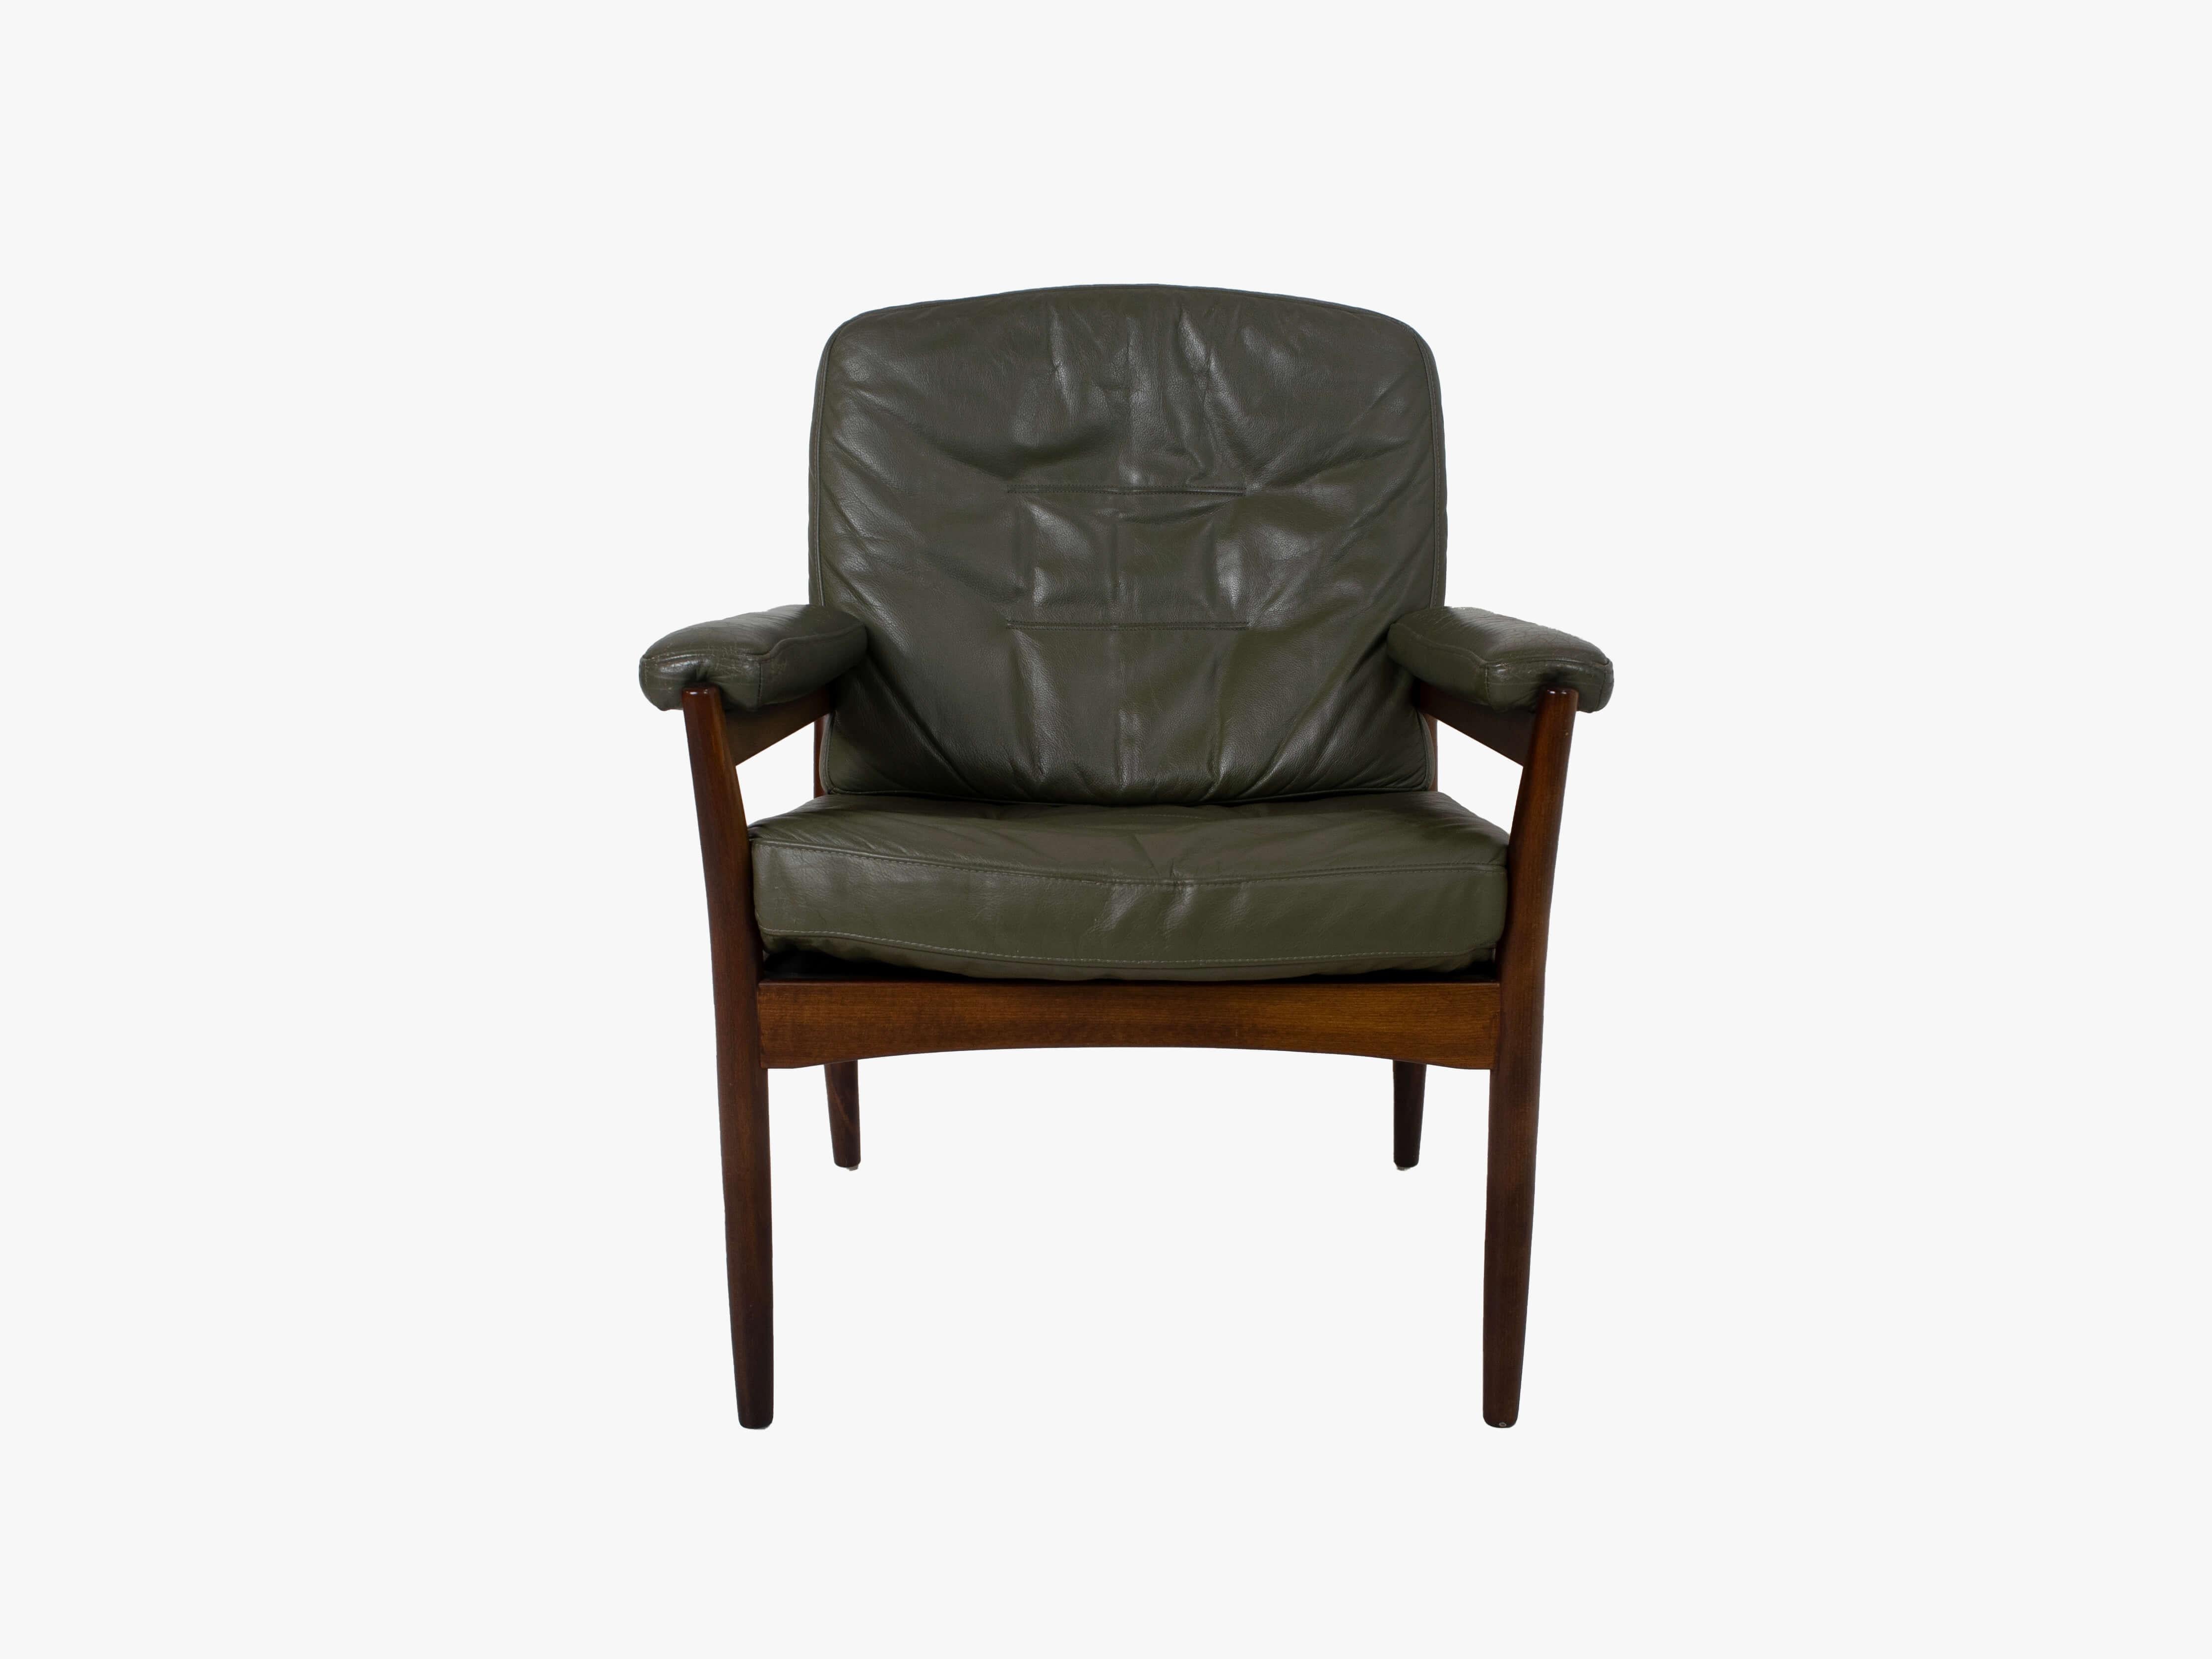 G-Mobel arm chair for Göte Möbler, Sweden in about 1970. A solid wooden frame with a dark green upholstery gives it a robust look. The chair is in good condition with most of the leather wear on the armrests (see photo). Clearly marked with a